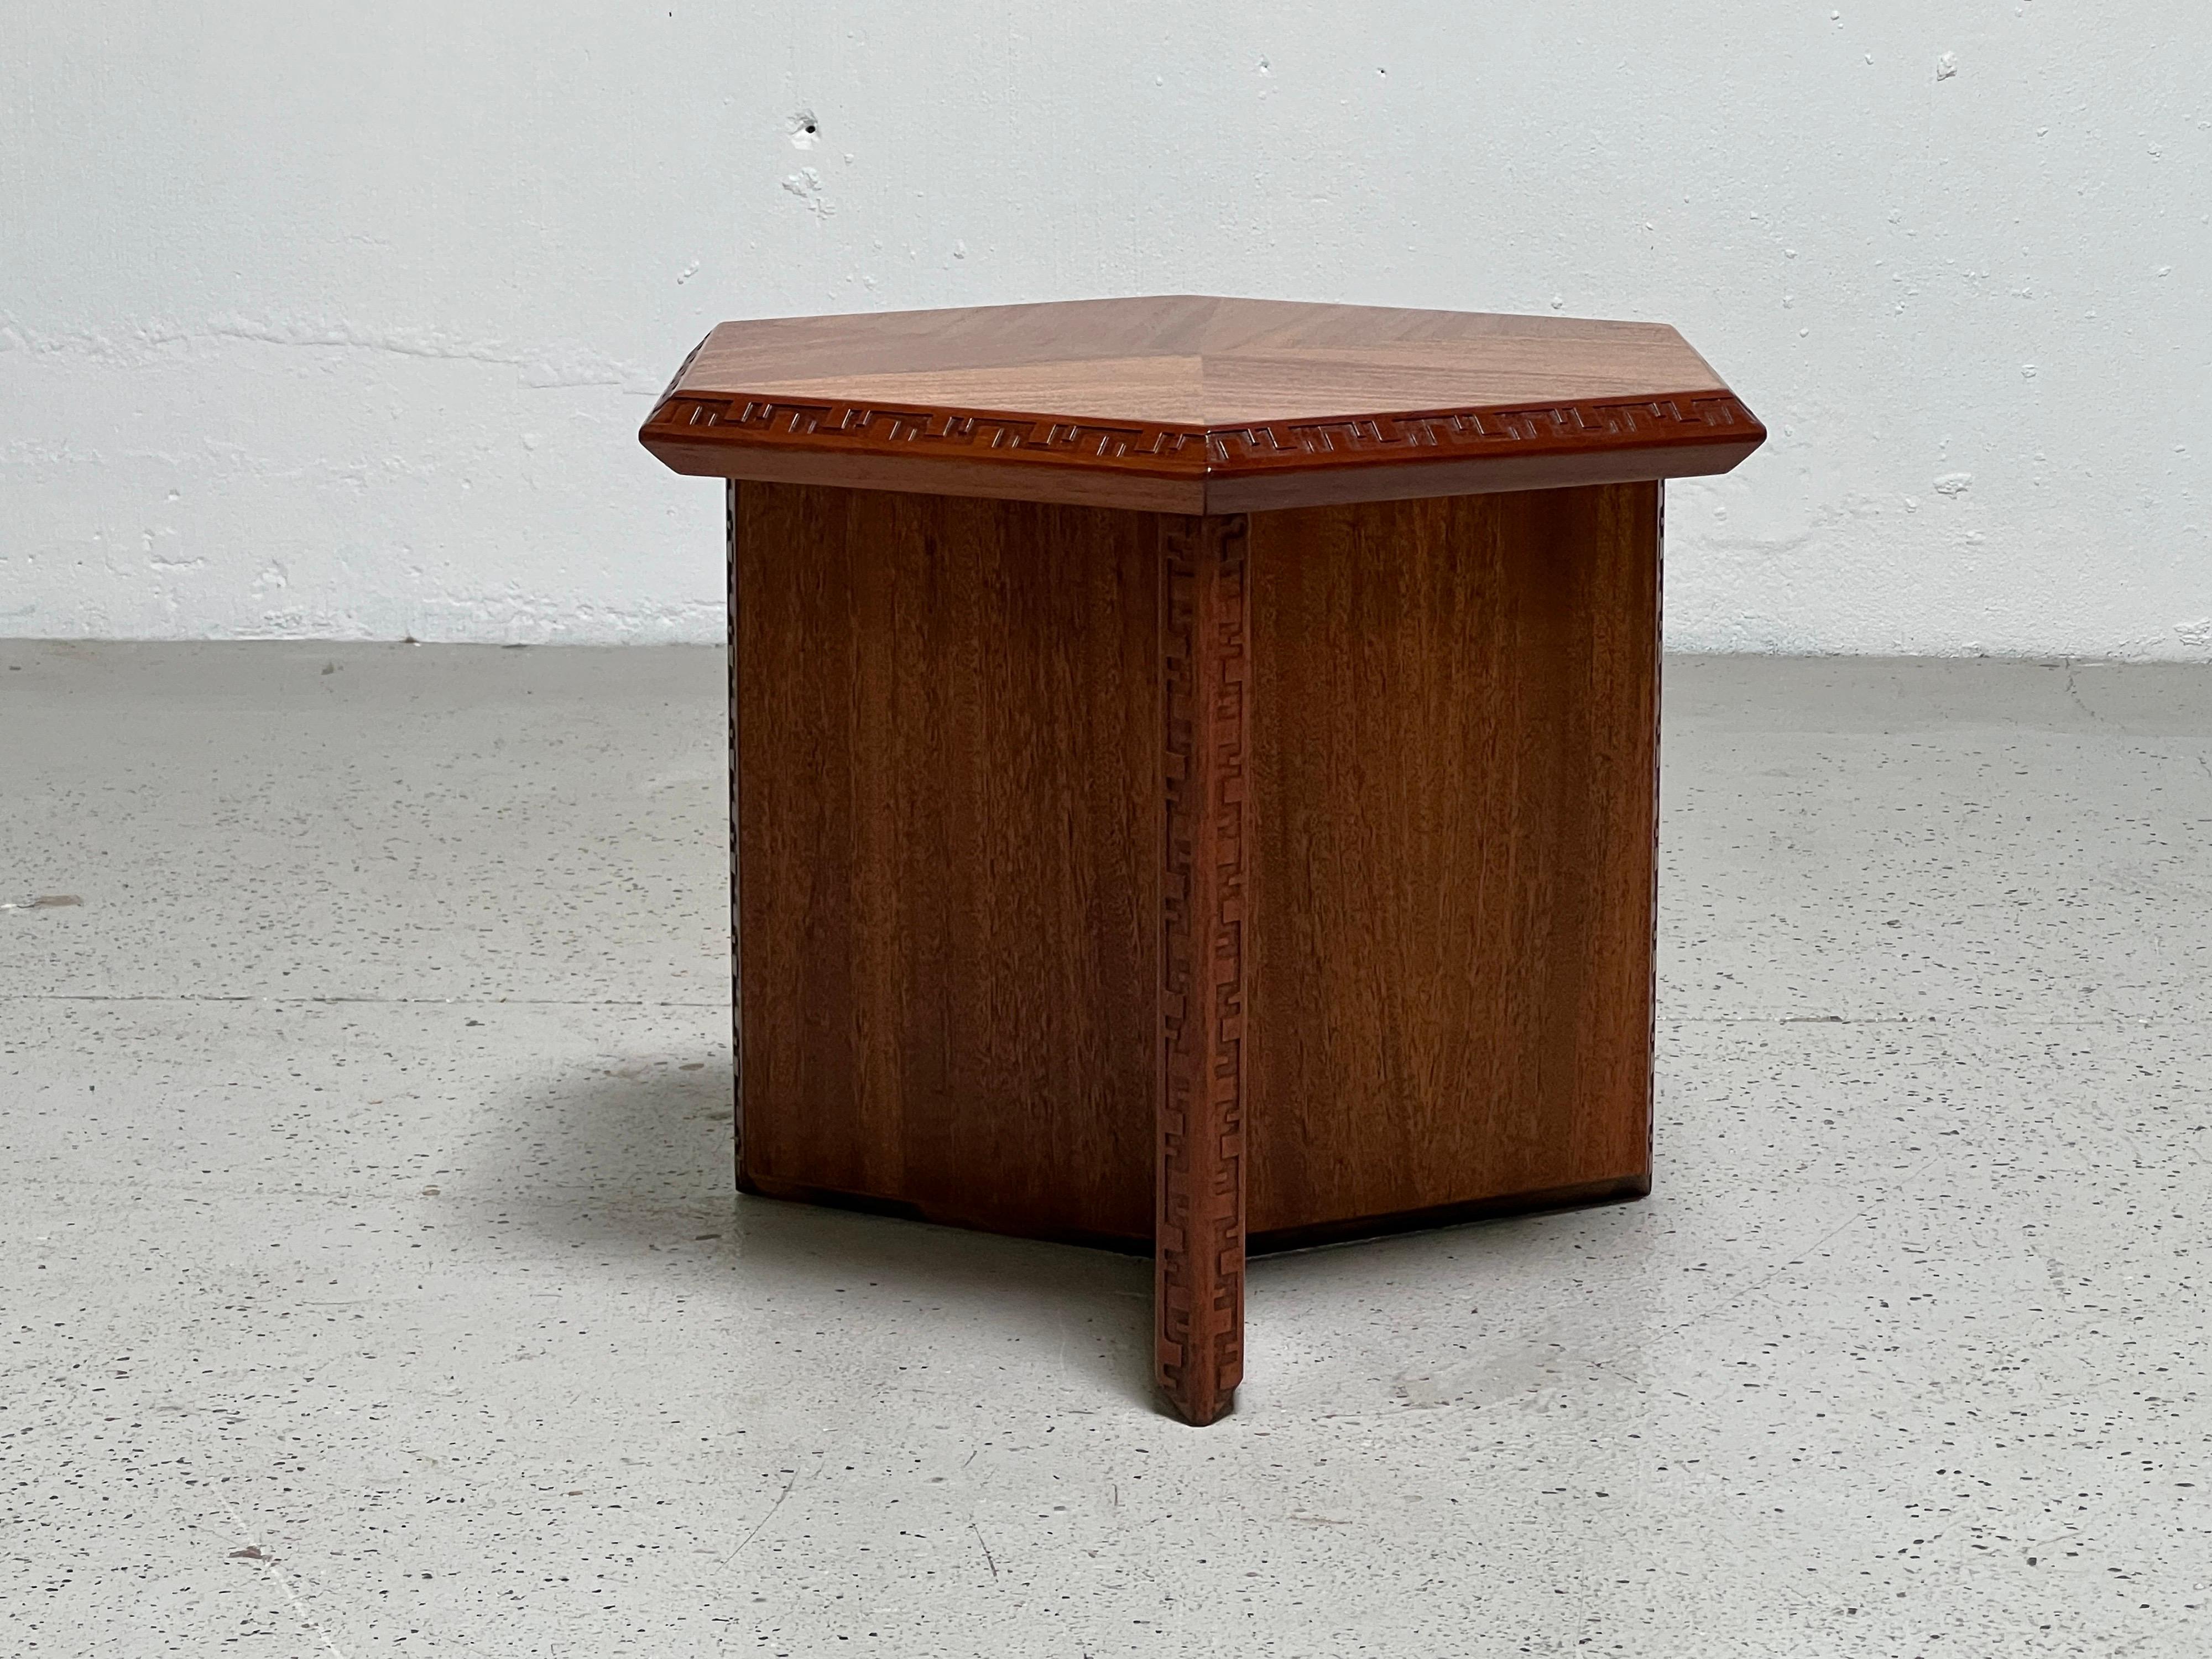 A mahogany hexagonal side table designed by Frank Lloyd Wright for Henredon. Larger version available separately.